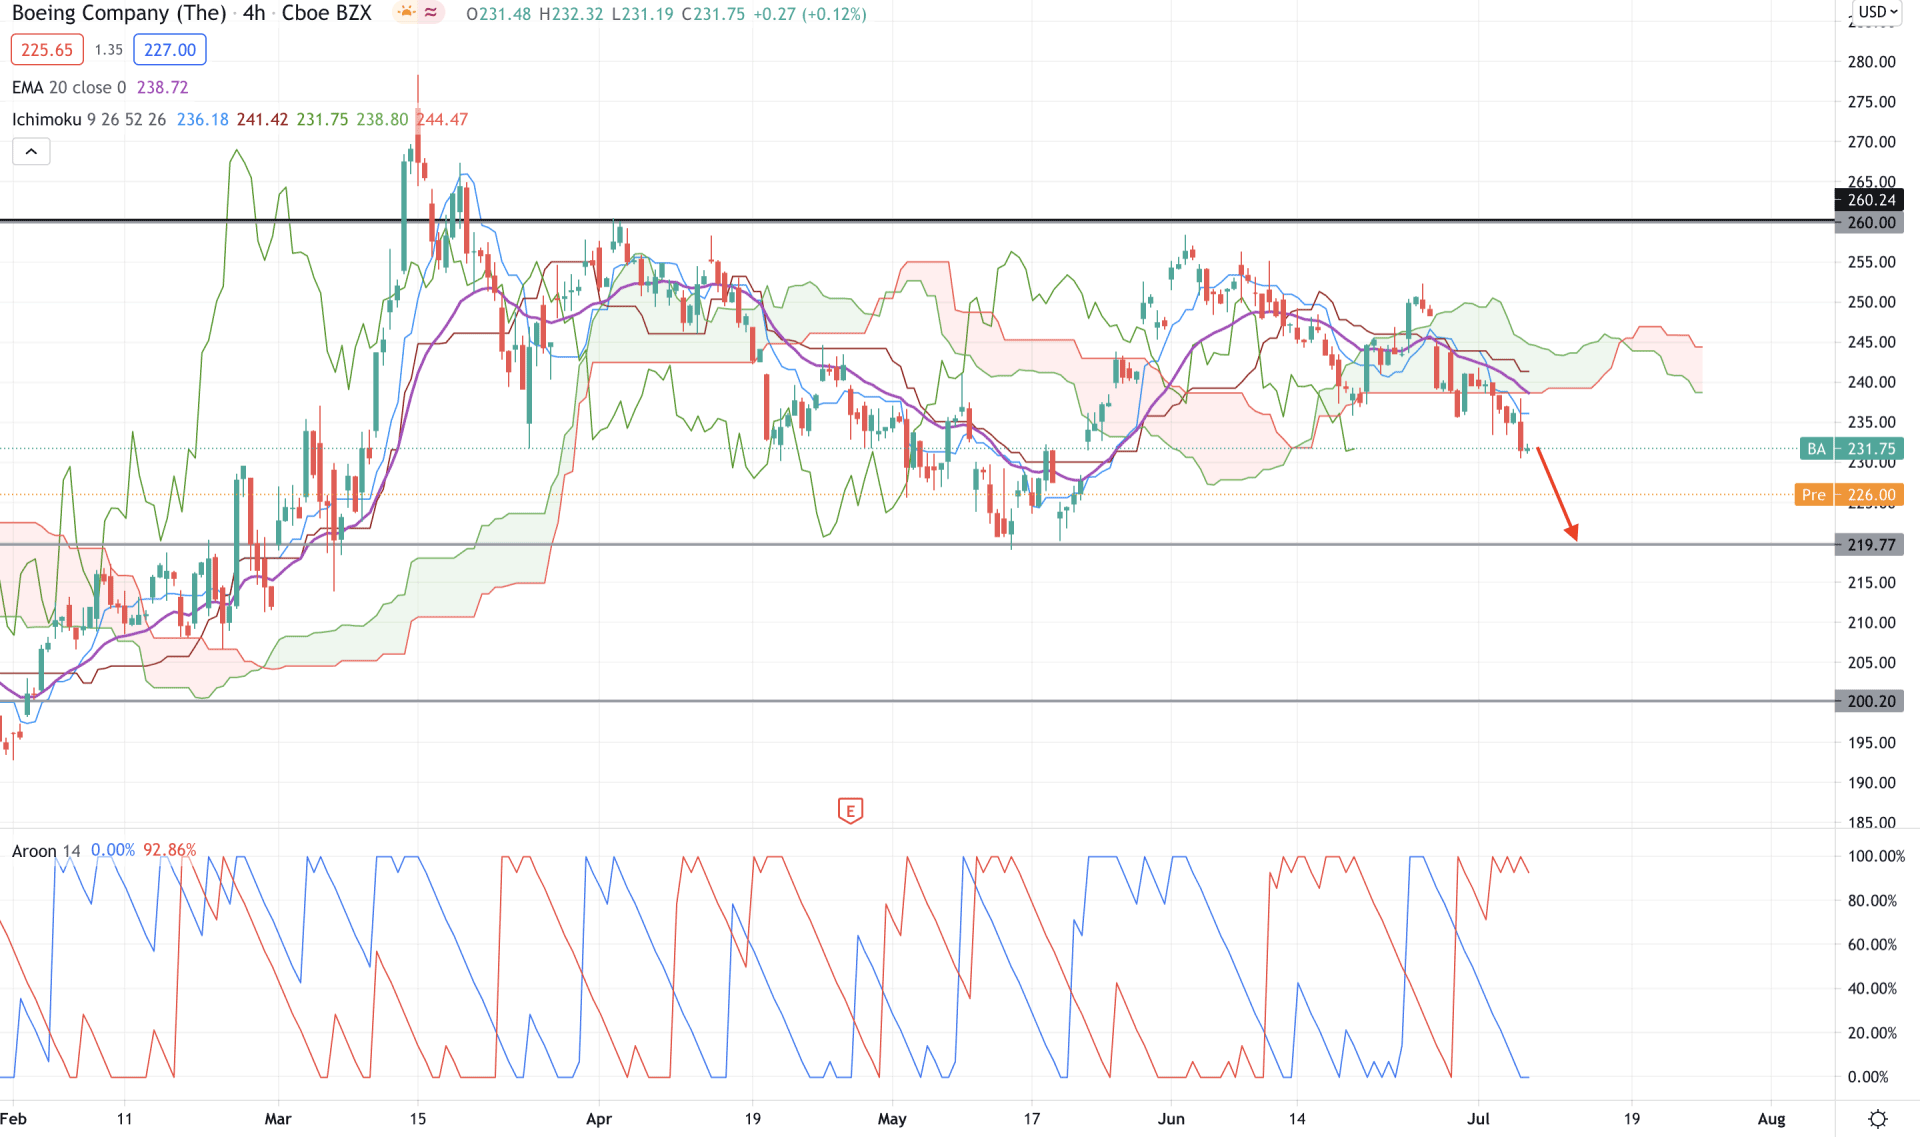 Boeing Stock H4 Technical Analysis 8 July 2021